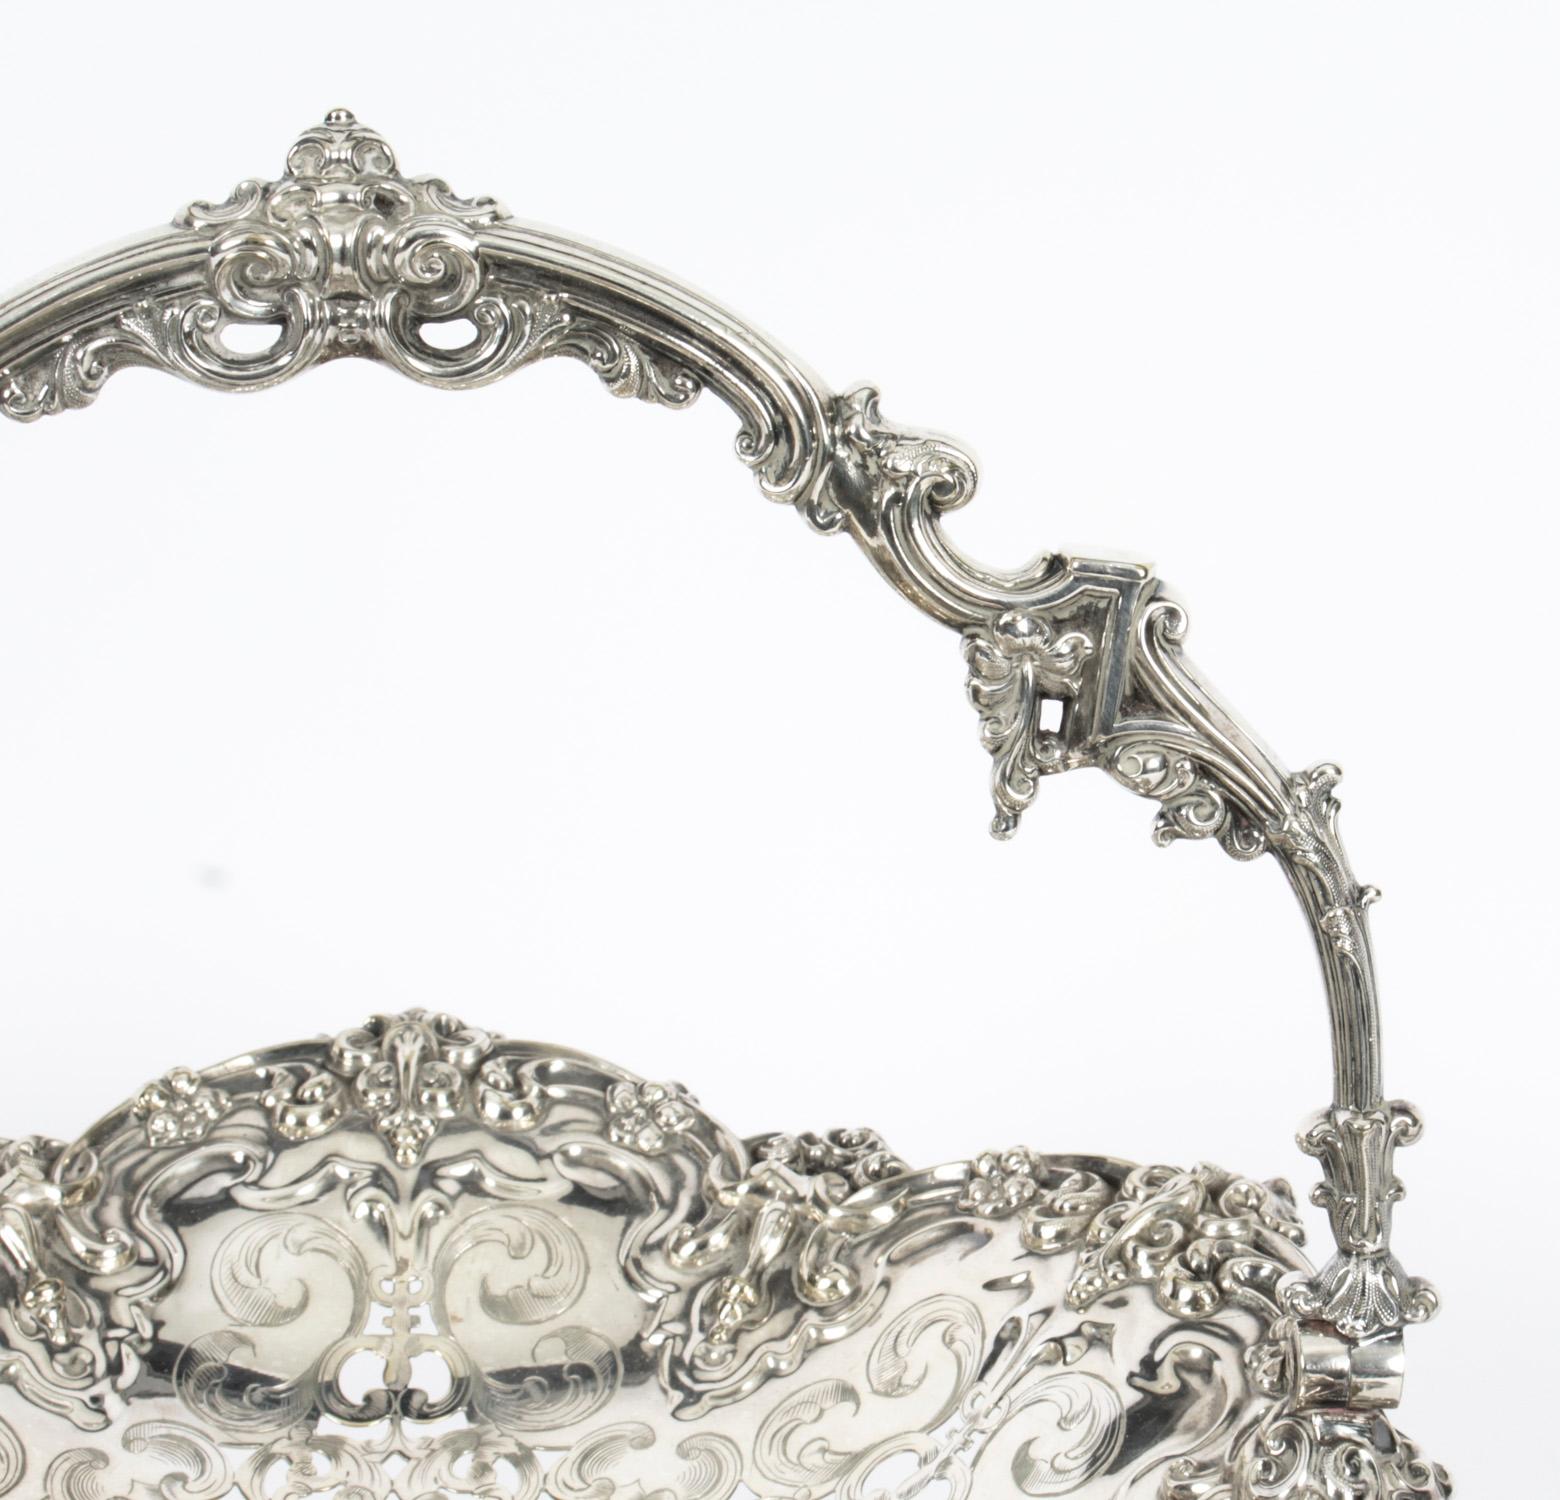 Antique Silver Plated Fruit Basket Wilkinson & Co 19th Century 5